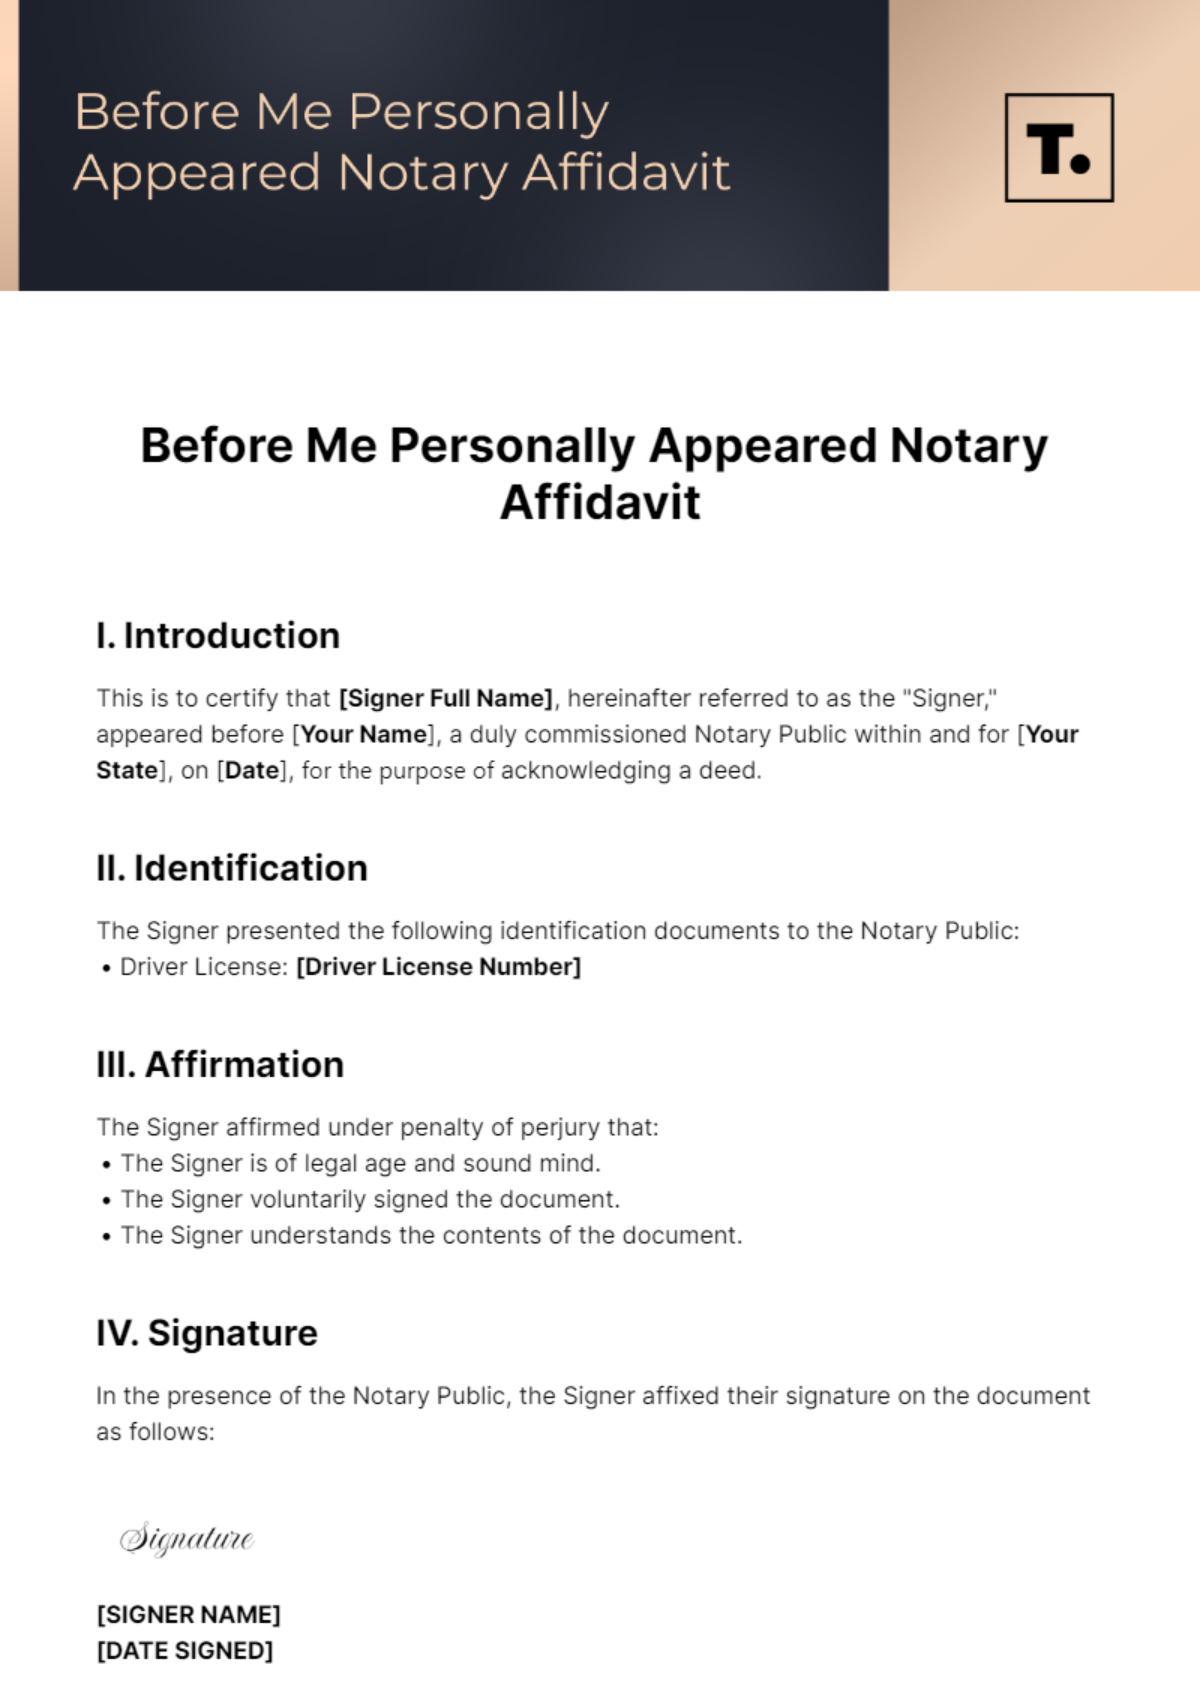 Free Before Me Personally Appeared Notary Affidavit Template